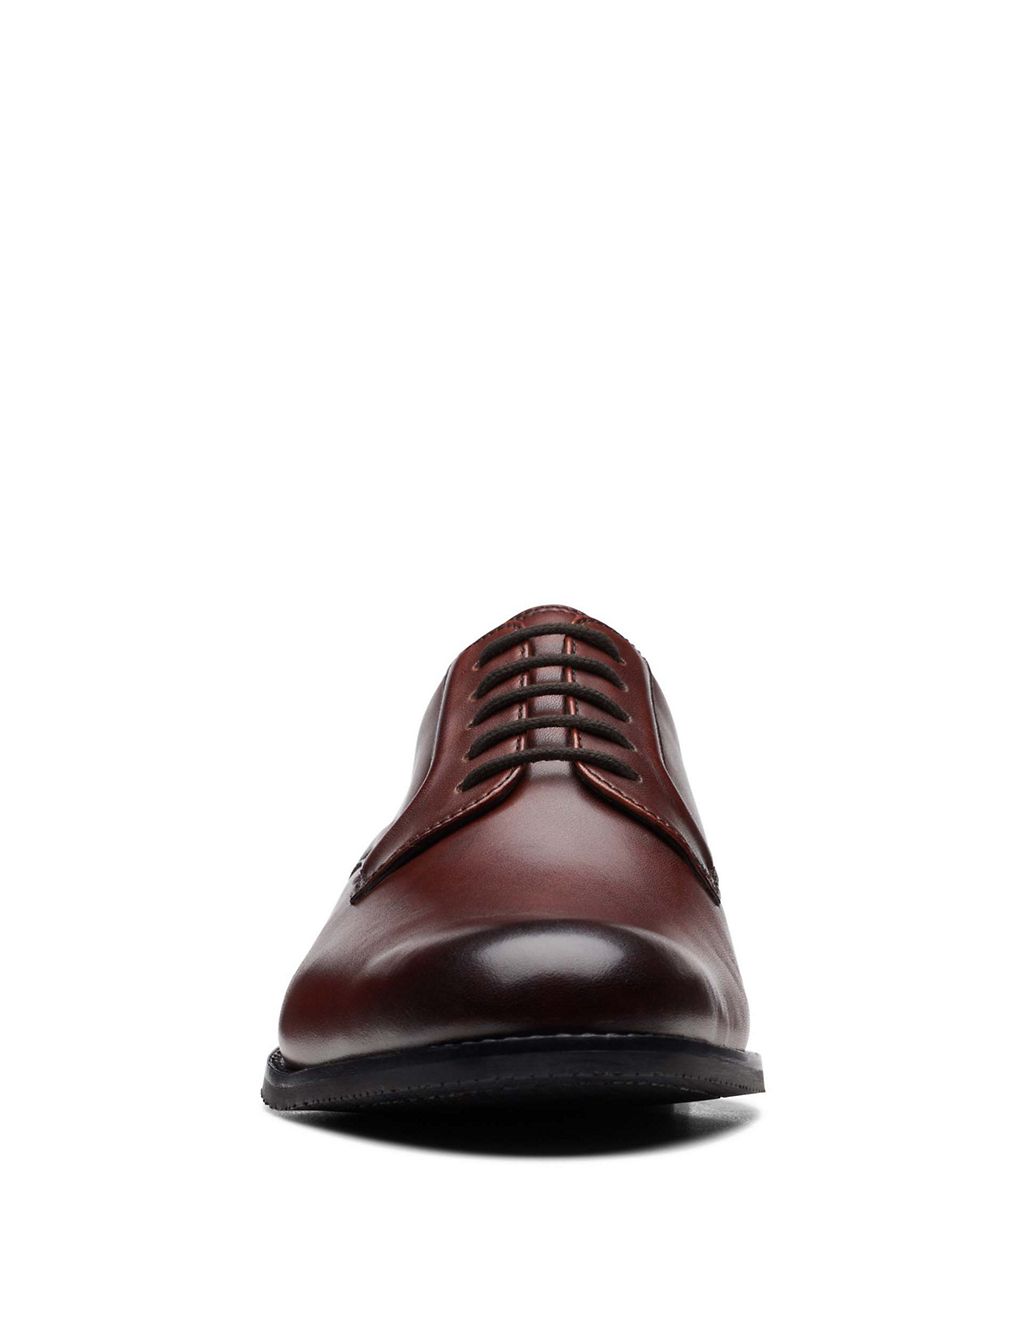 Leather Oxford Shoes 2 of 7